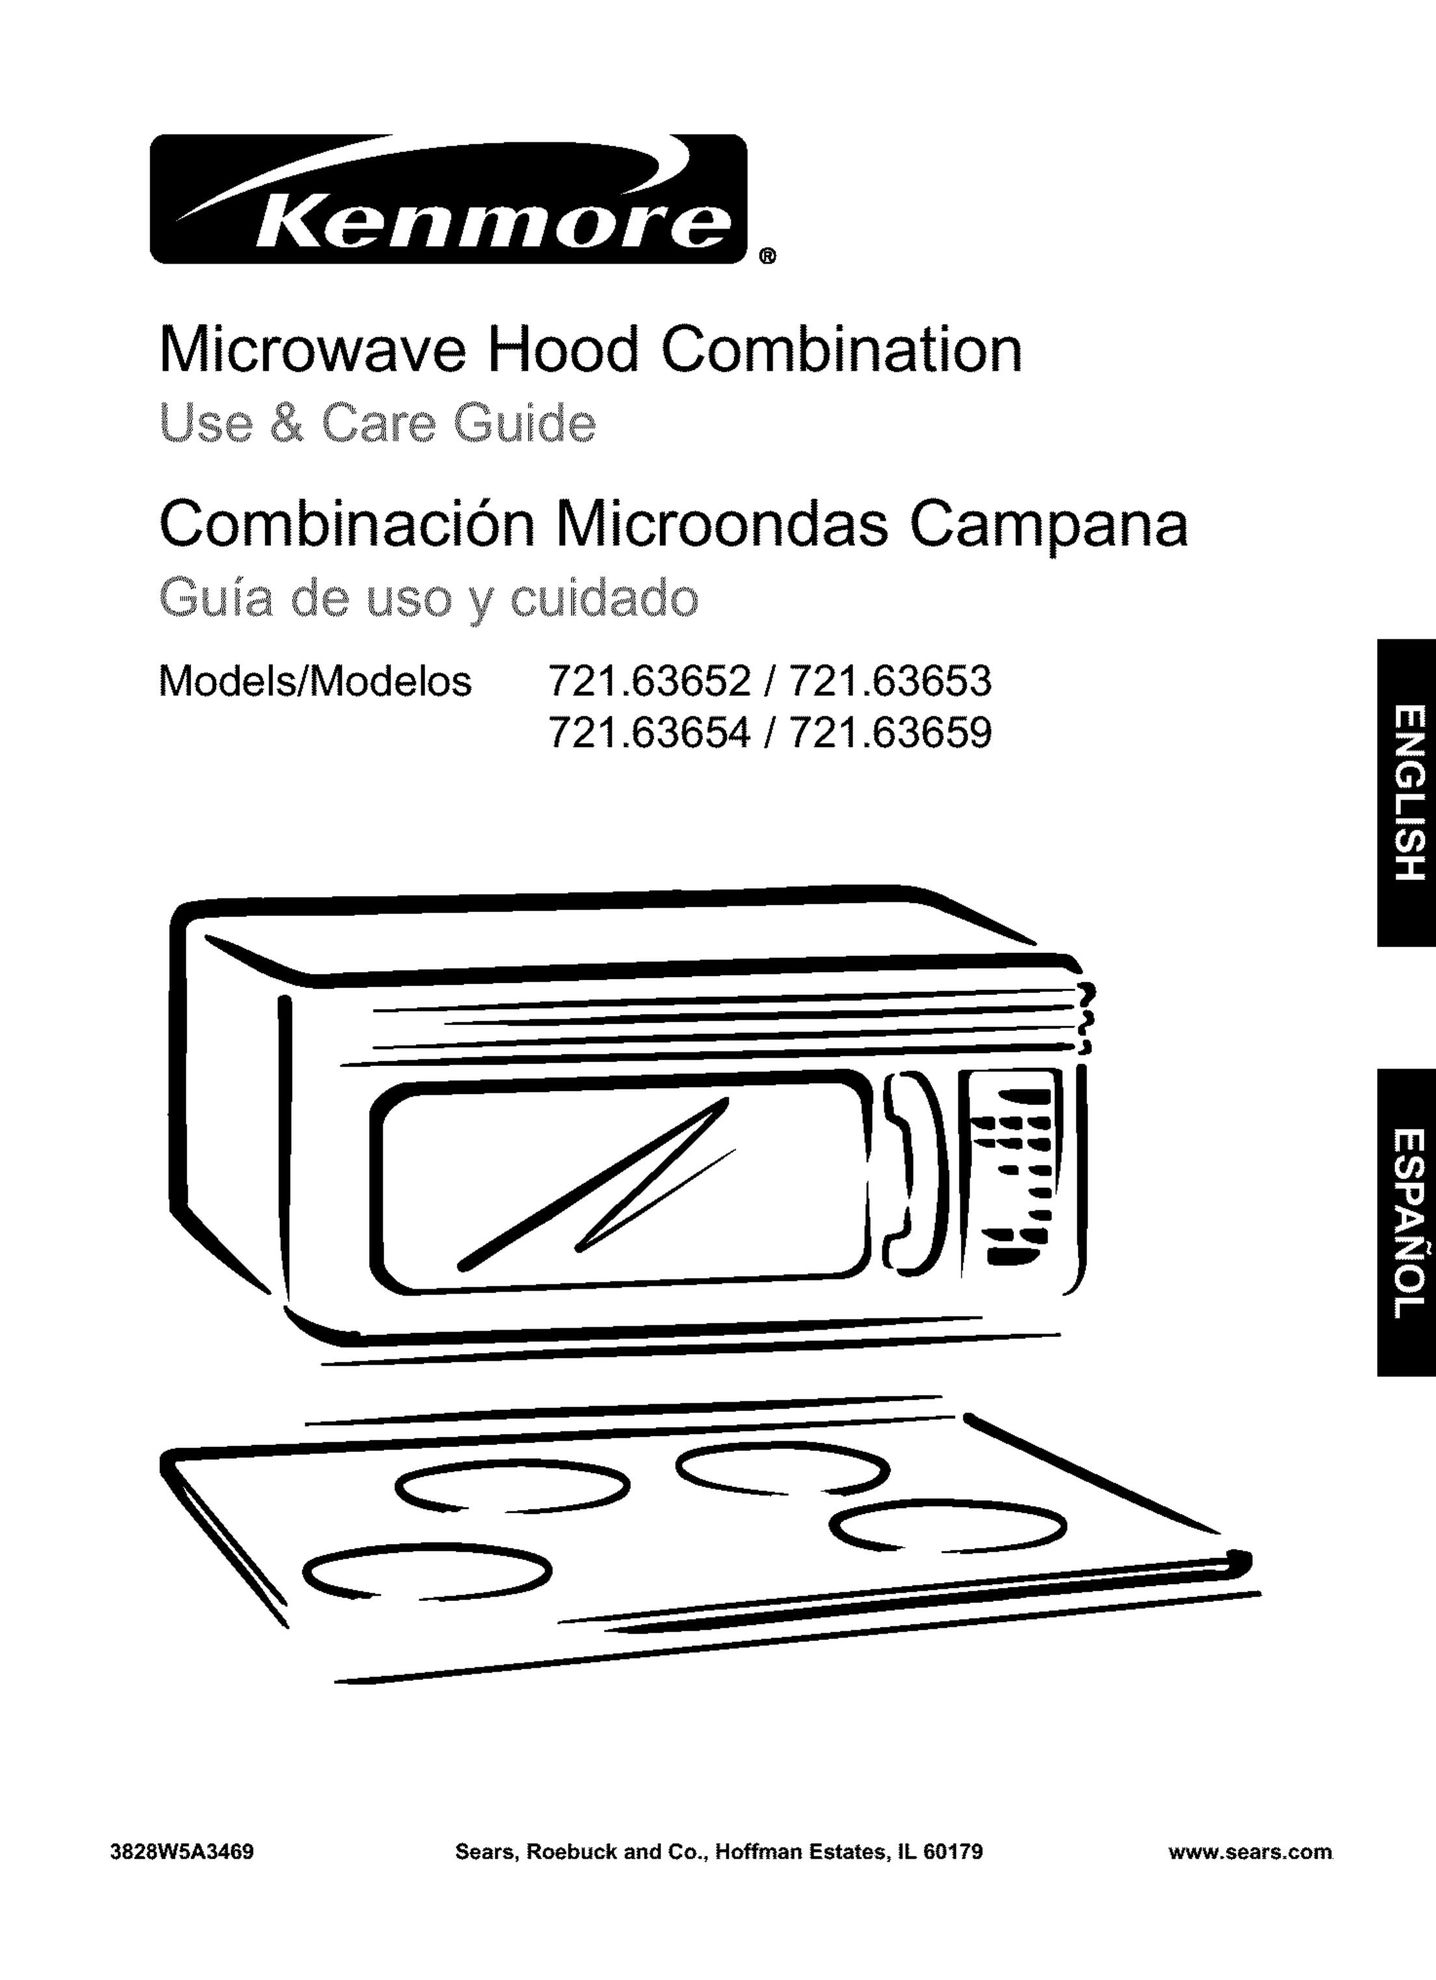 Kenmore 721.63653 Microwave Oven User Manual